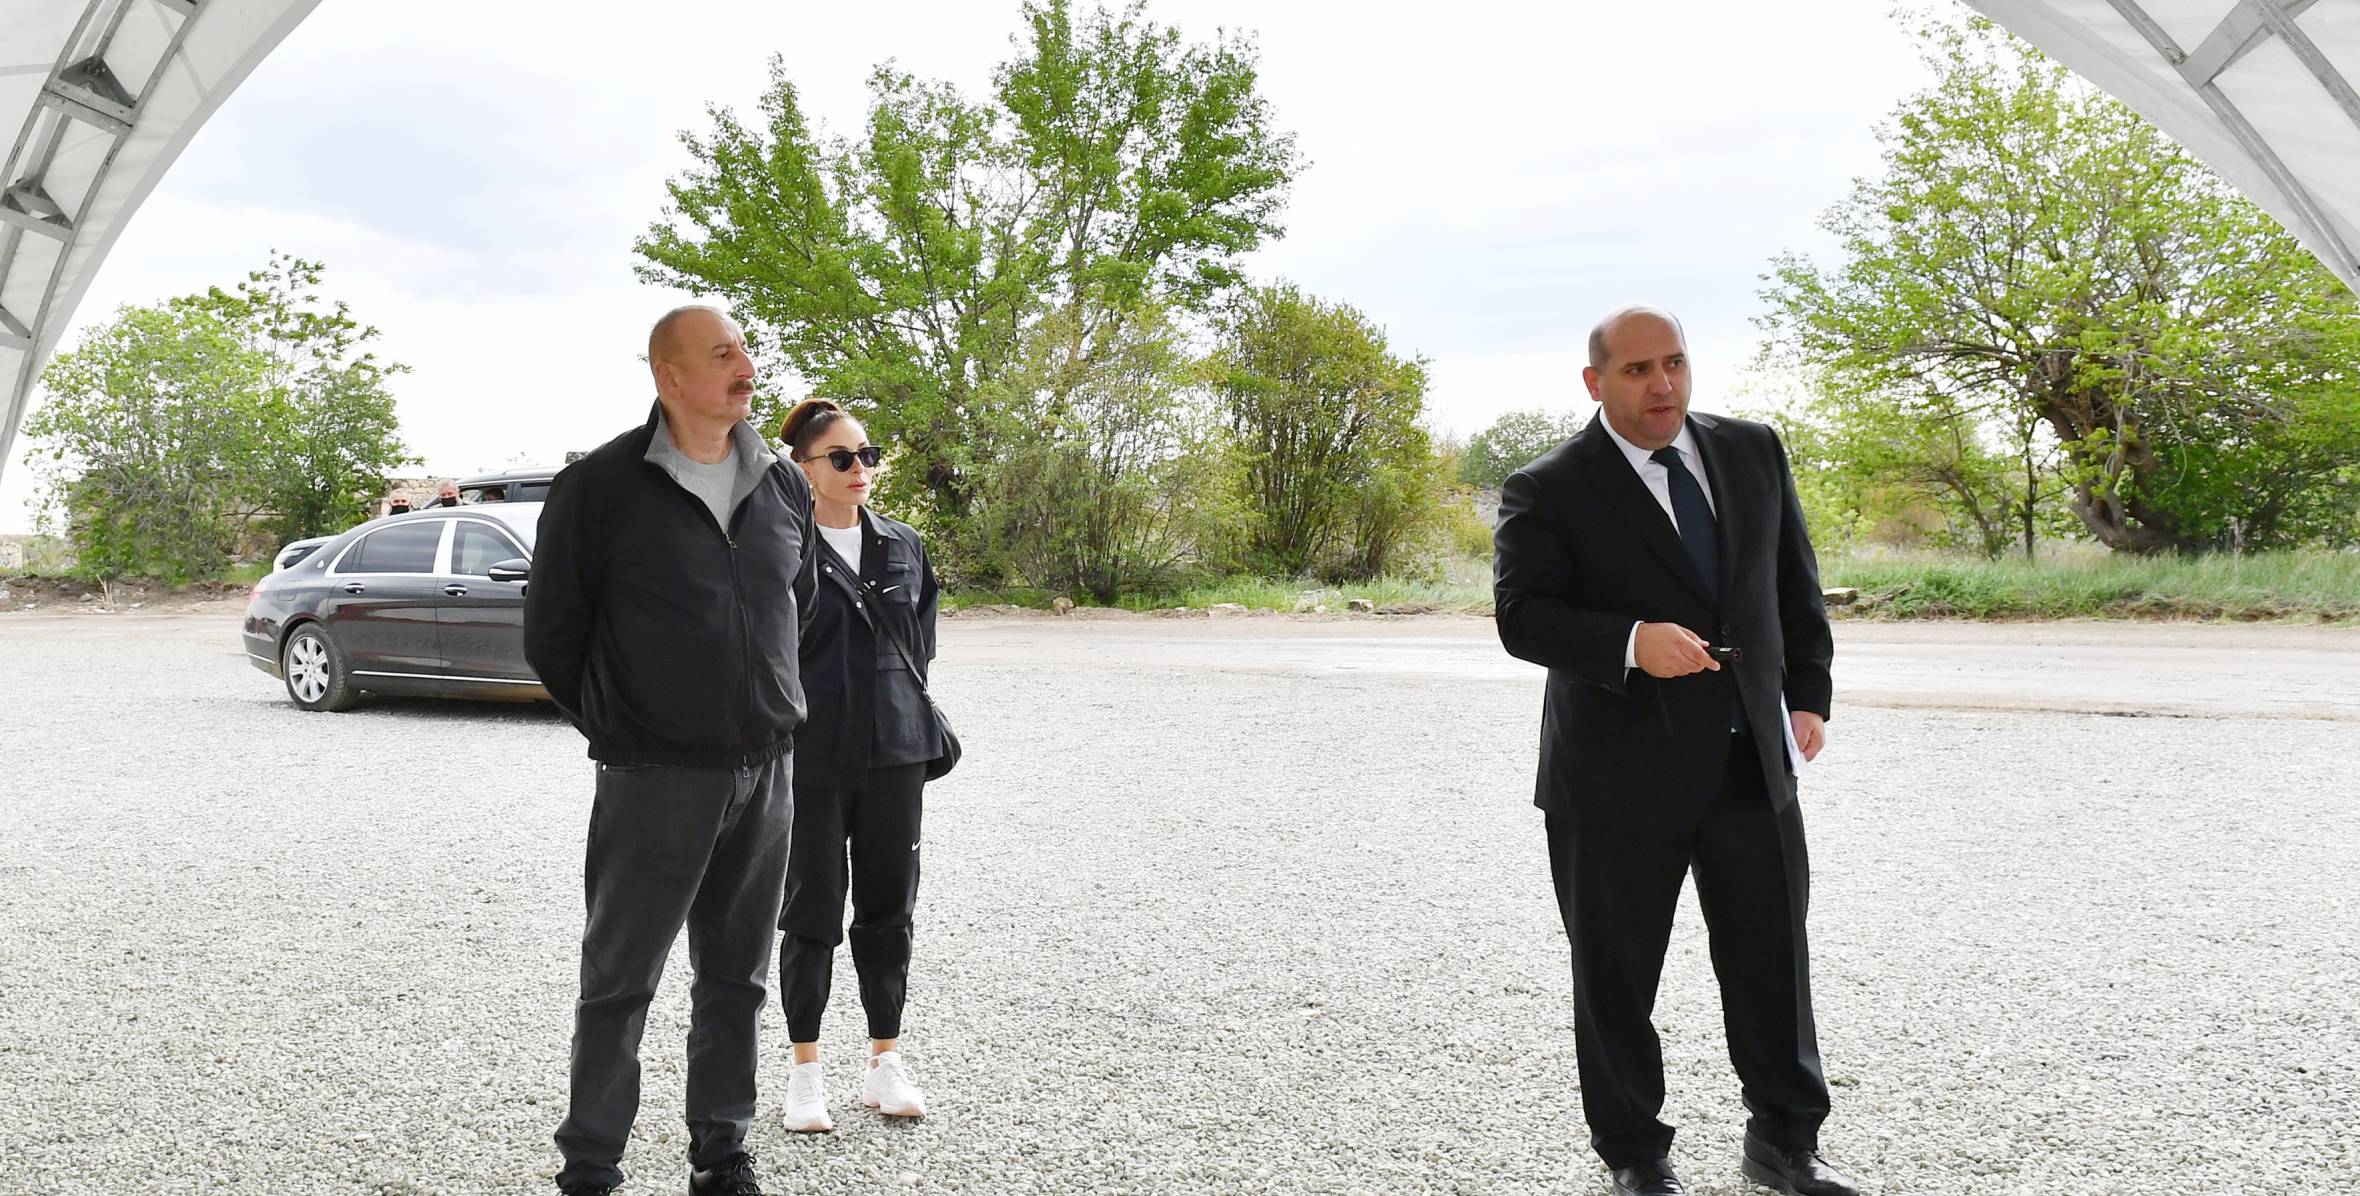 Ilham Aliyev and First Lady Mehriban Aliyeva have attended a groundbreaking ceremony for an administrative building to be built in the city of Aghdam